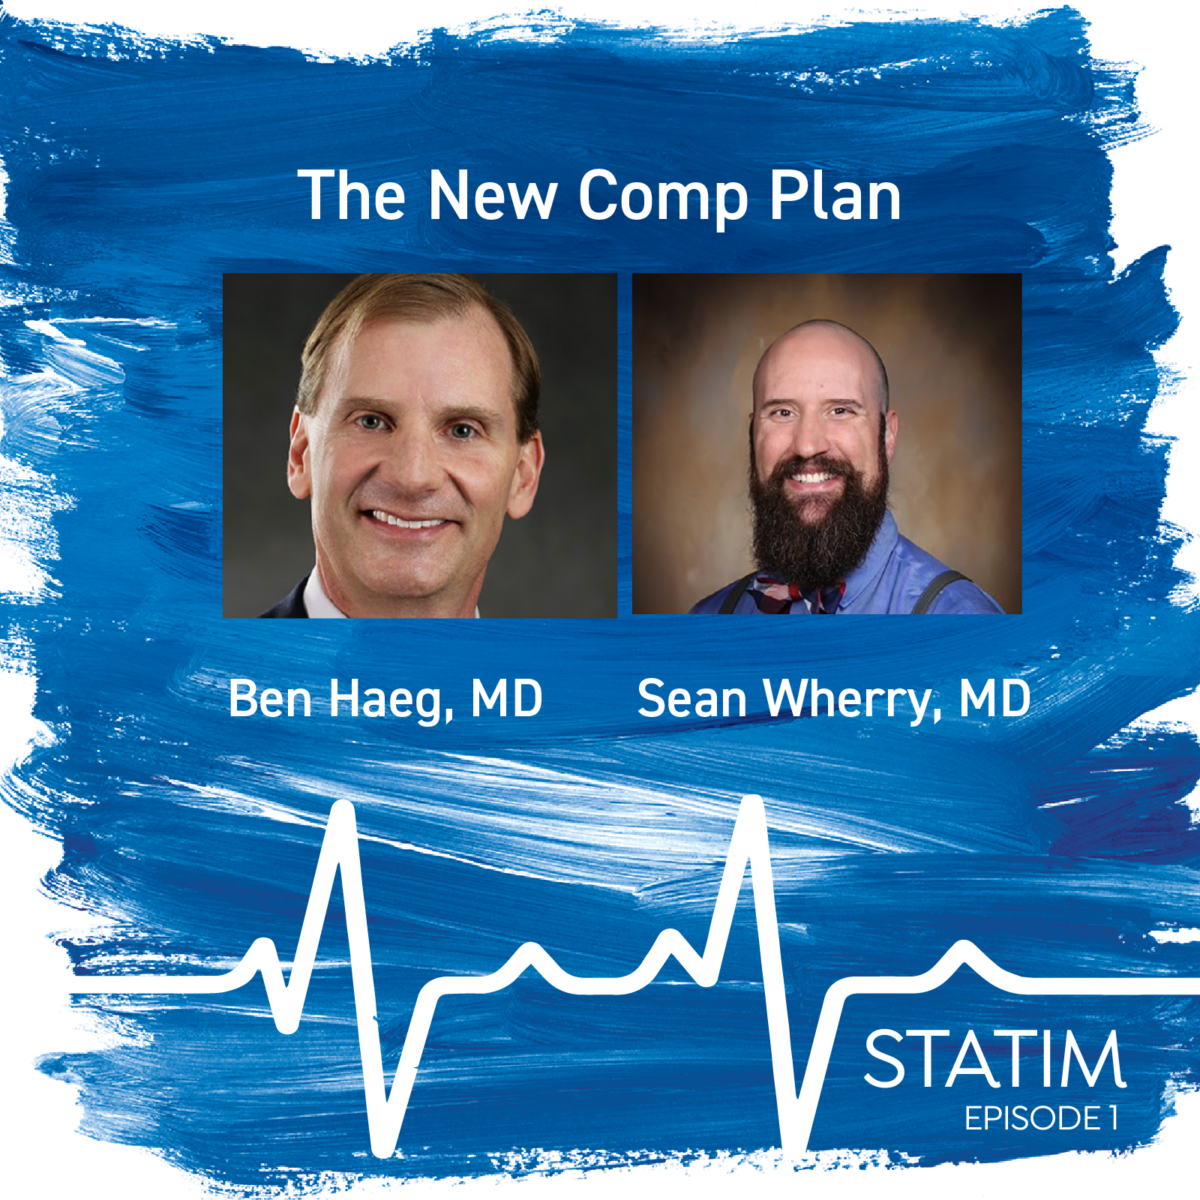 Promotion graphic with photos of Drs. Ben Haeg and Sean Wherry on the STATIM Podcast episode 1 The New Comp Plan